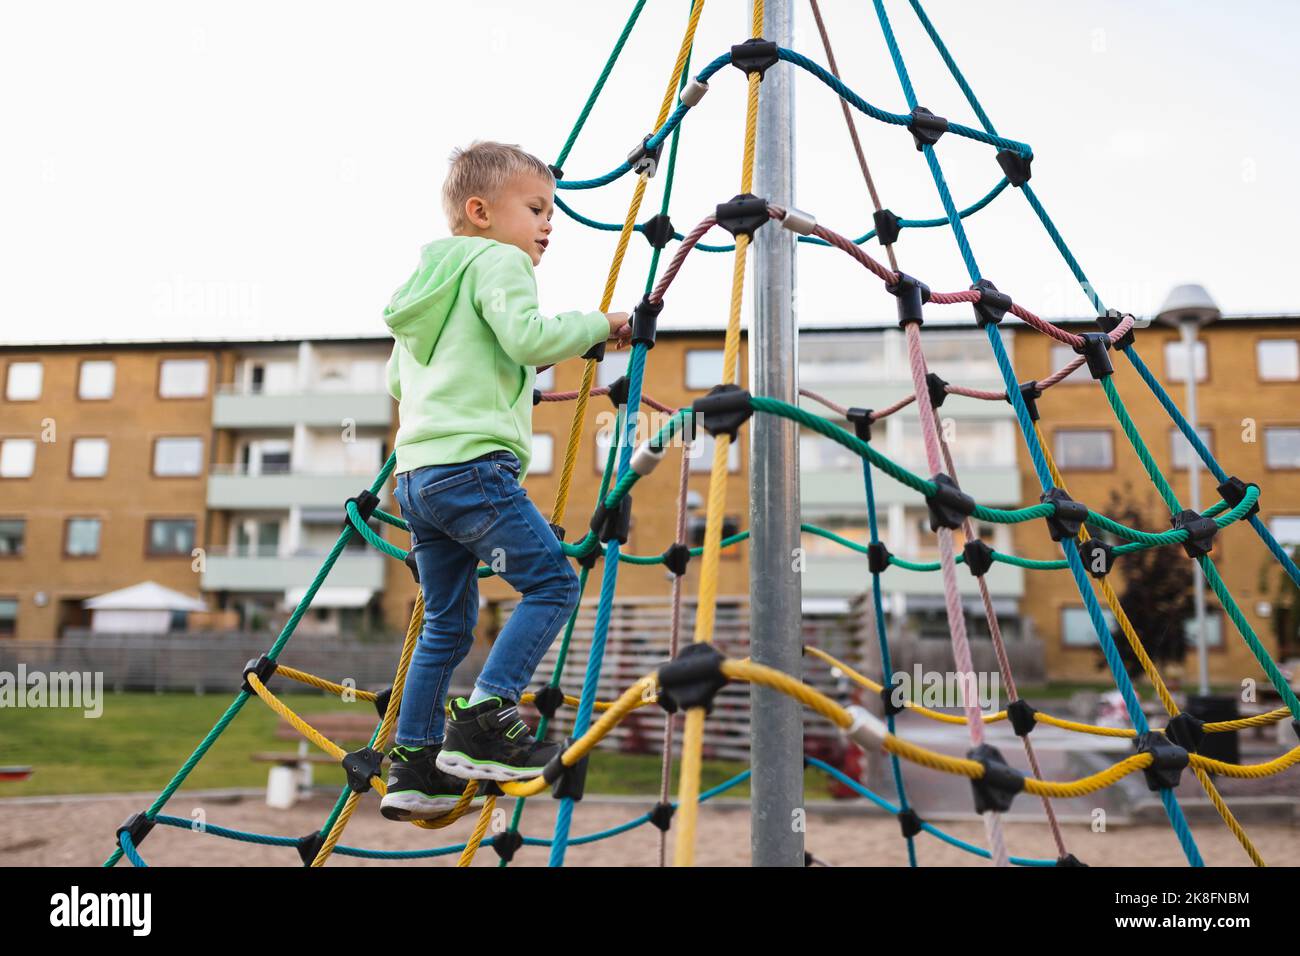 Boy climbing rope in park Stock Photo